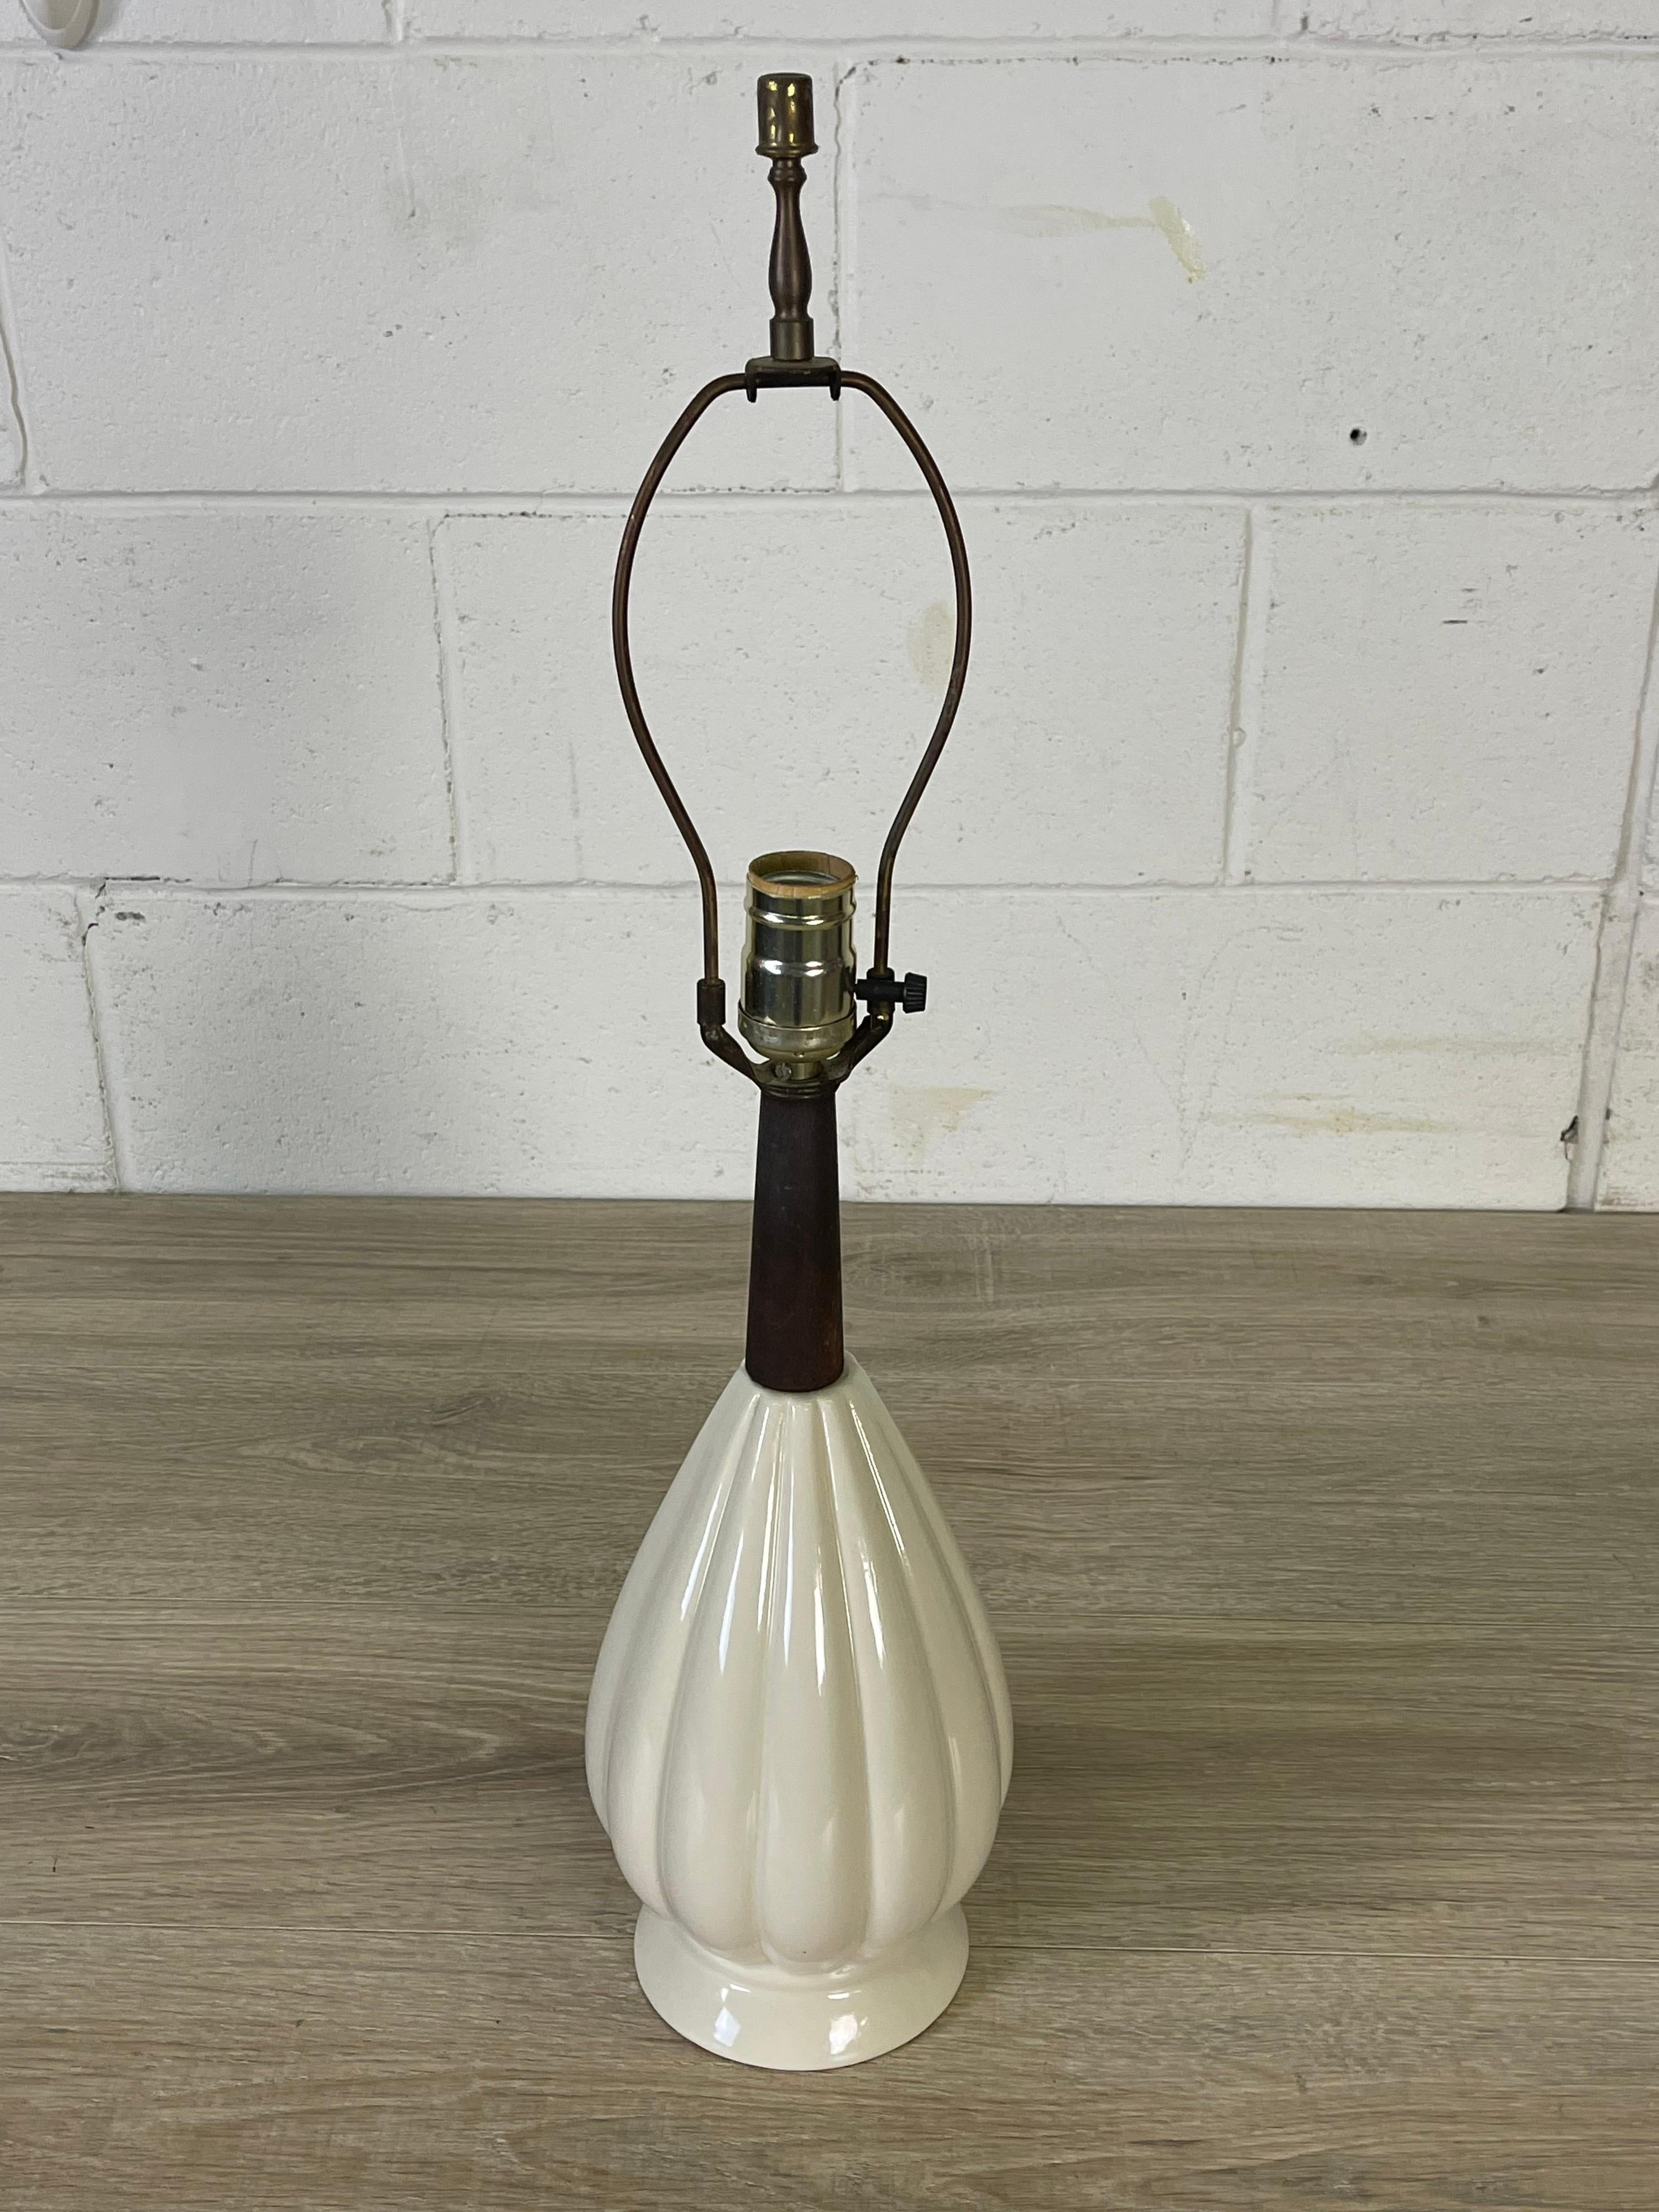 Vintage 1960s white ceramic table lamp with a dark walnut wood neck. Wired for the US and in working condition. Lamp uses a standard 100 watt bulb. Socket, 16”H. Harp, 4”Dia x 7”H. No marks.